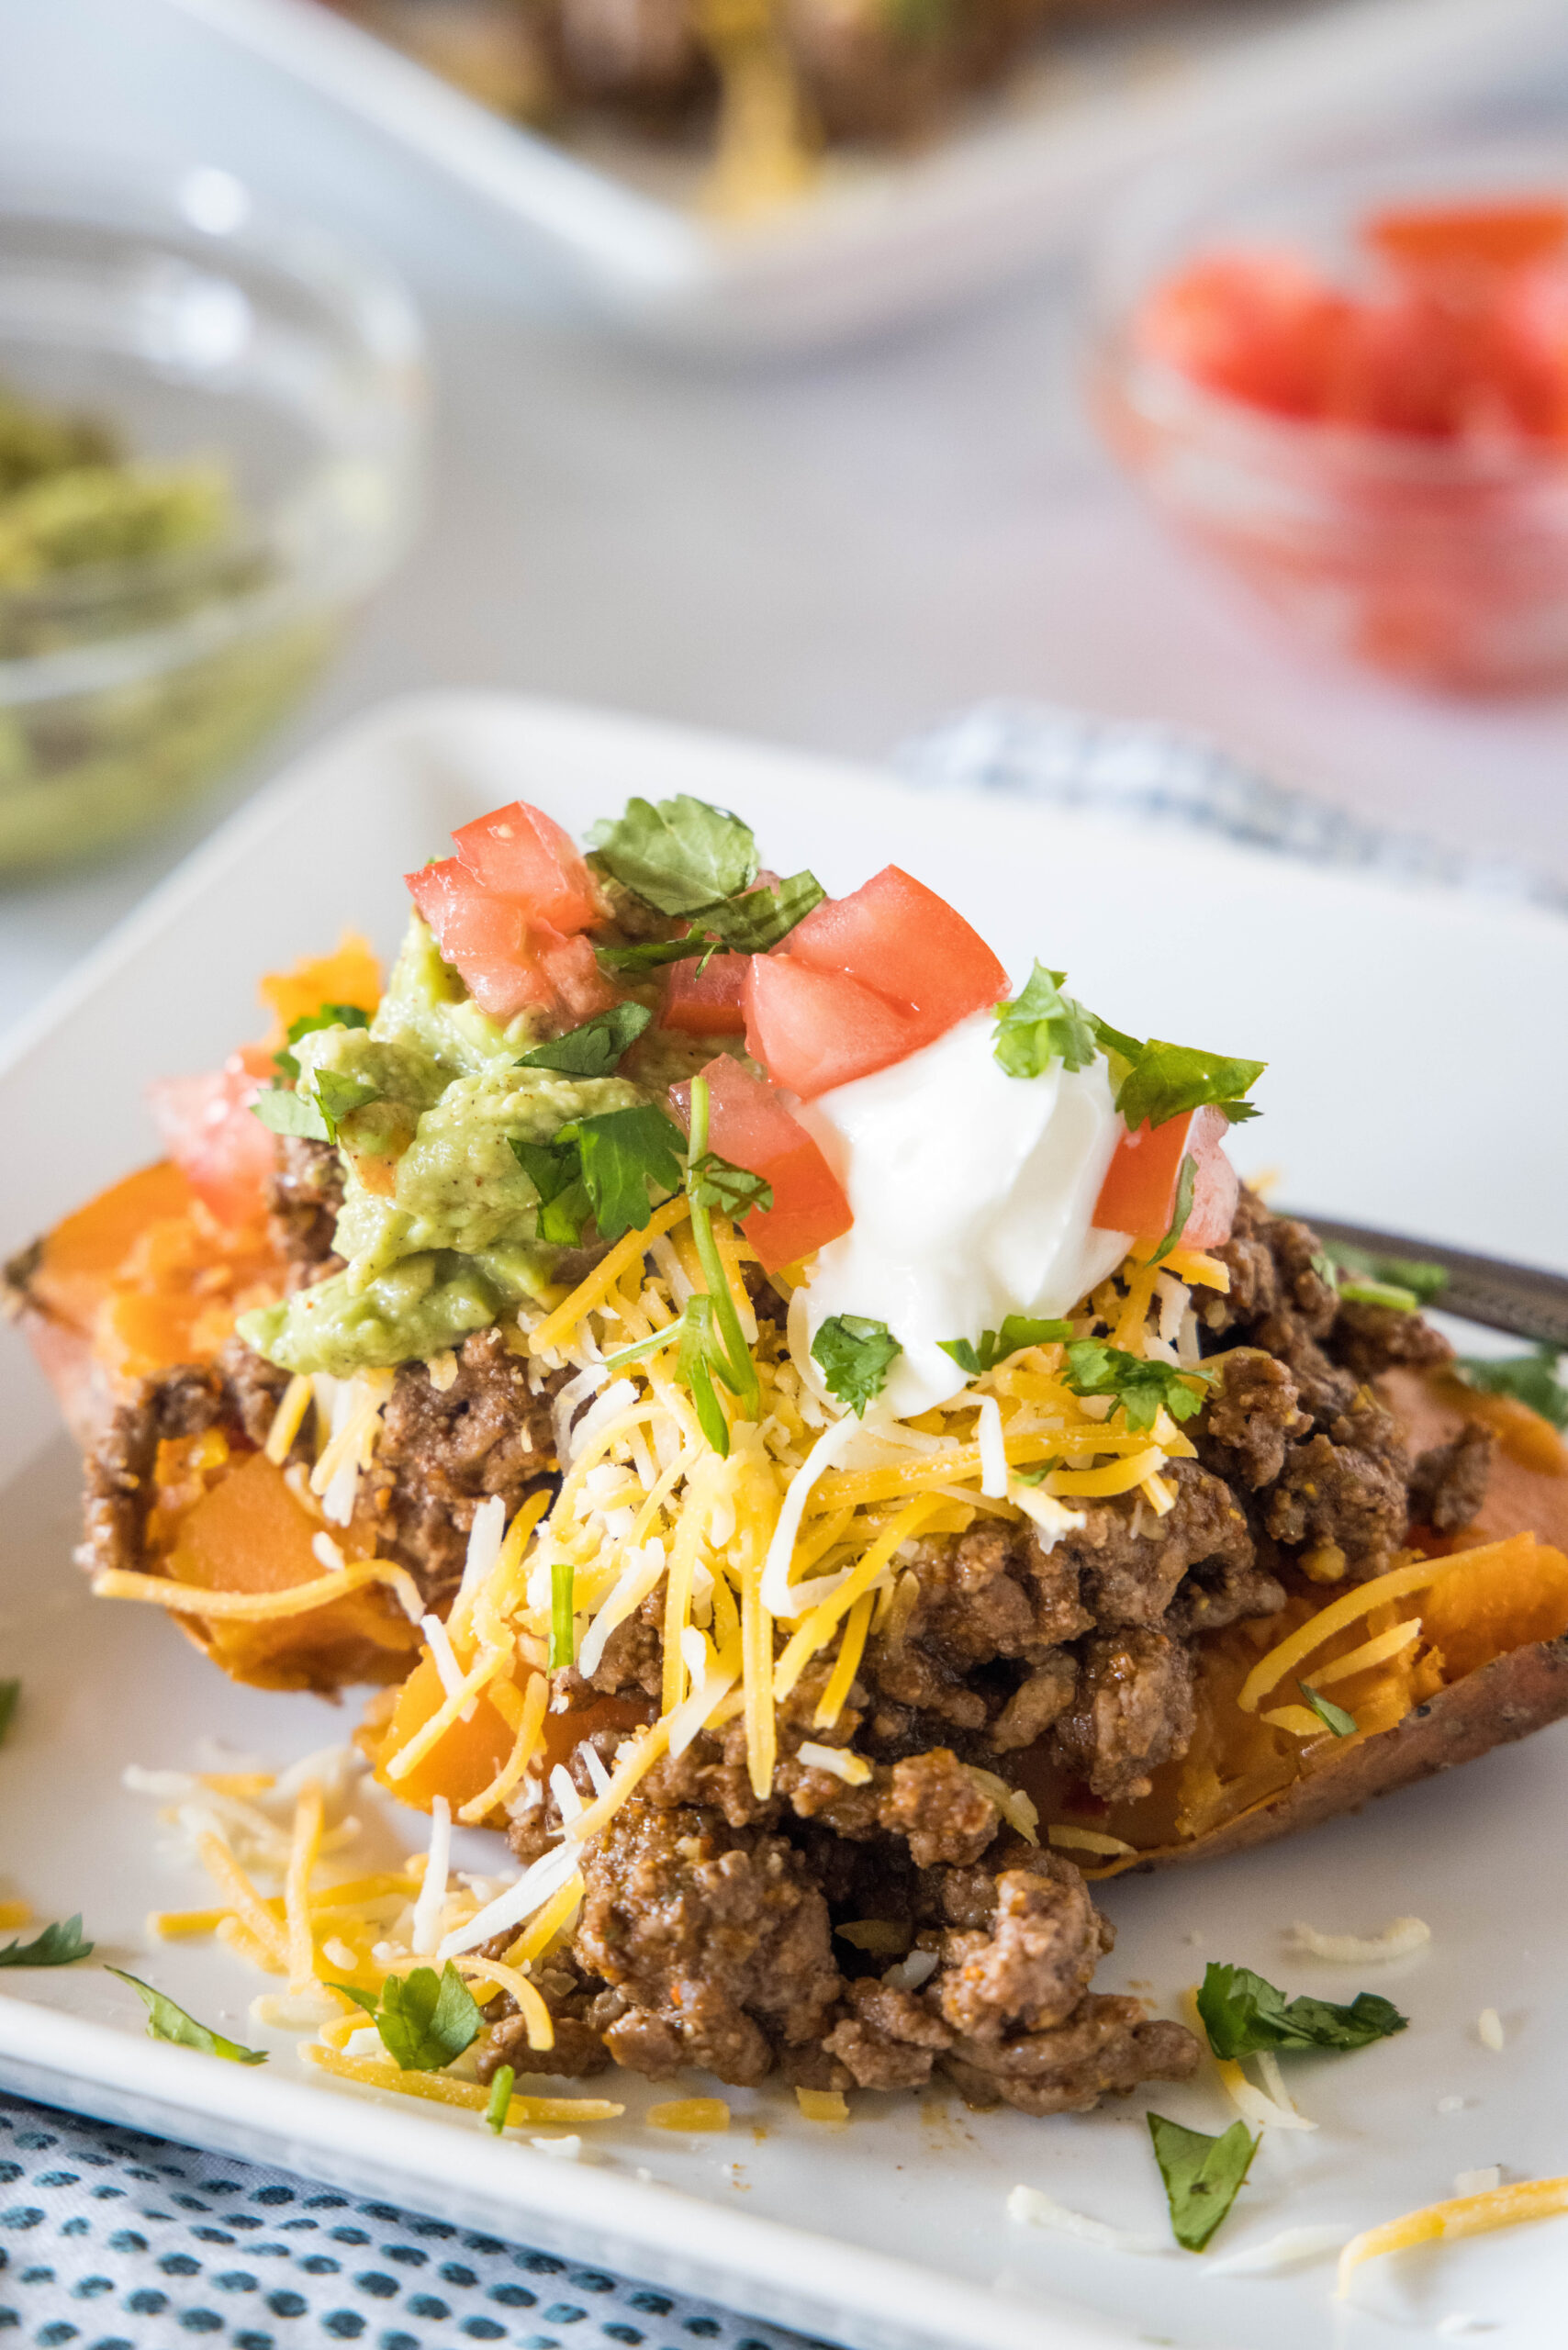 A taco sweet potato piled with taco toppings served on a white plate, with bowls of toppings in the background.